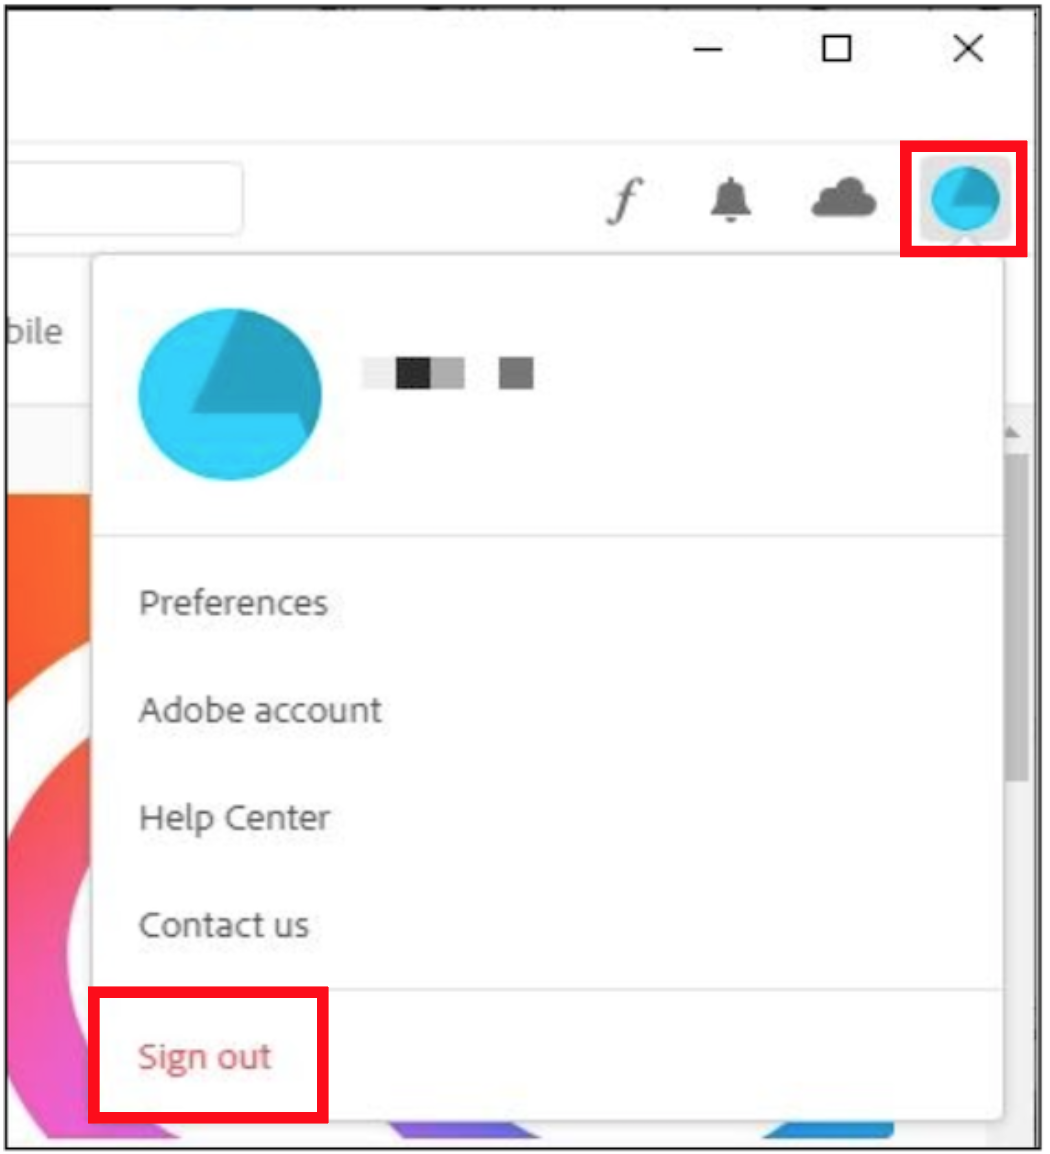 The Adobe Creative Cloud homepage shows a blue profile circle on the top-right corner, that when clicked, gives the user an option to sign out from the Adobe account.